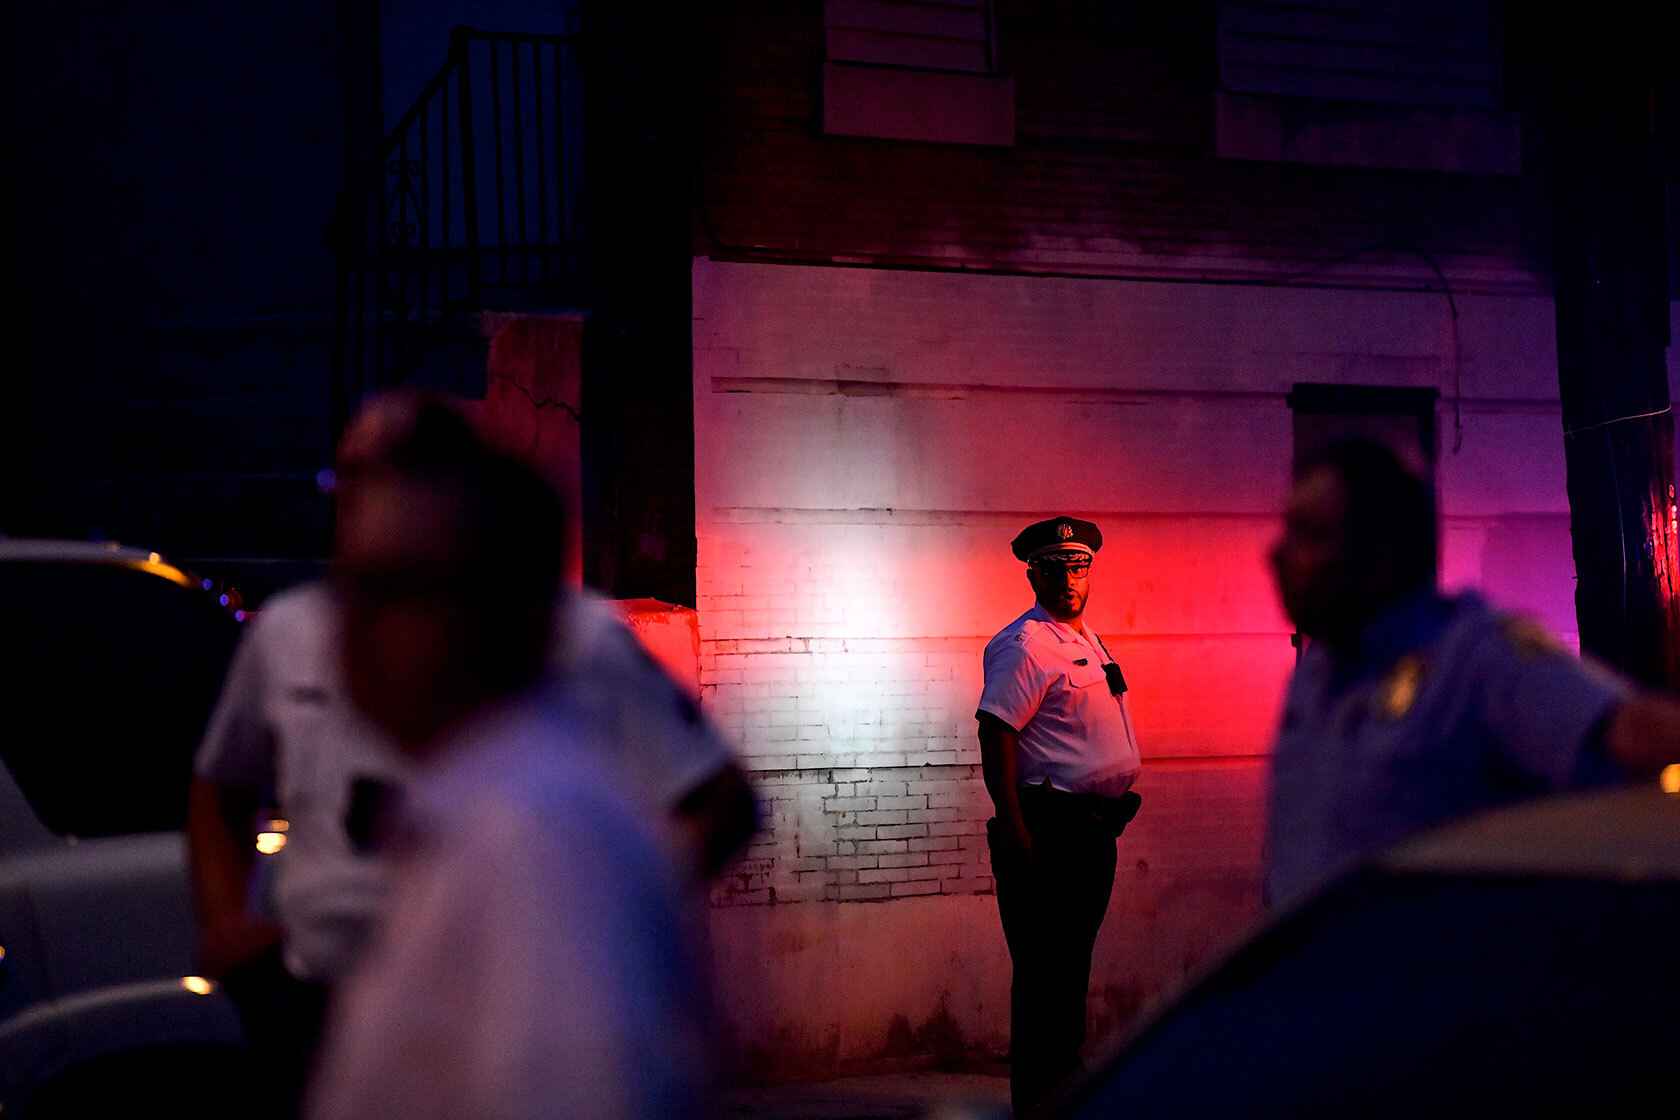 A police officer monitors activity near a residence while responding to a shooting.